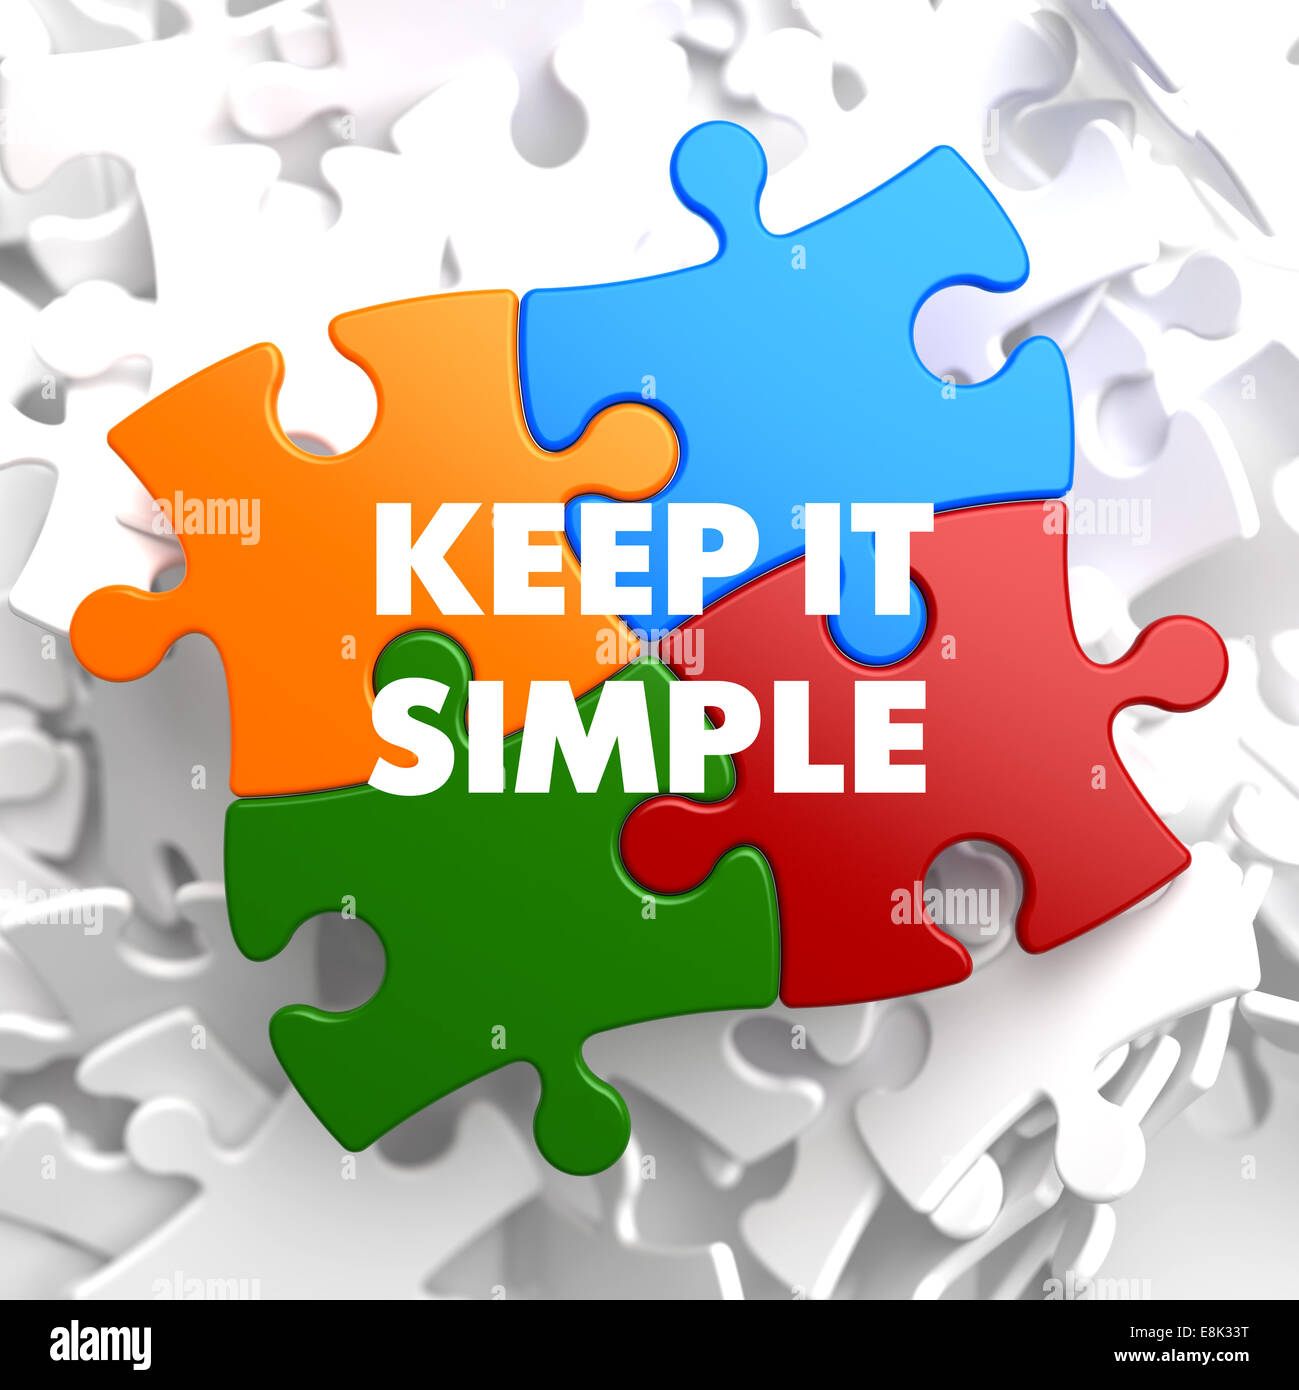 Keep it Simple on Multicolor Puzzle. Stock Photo